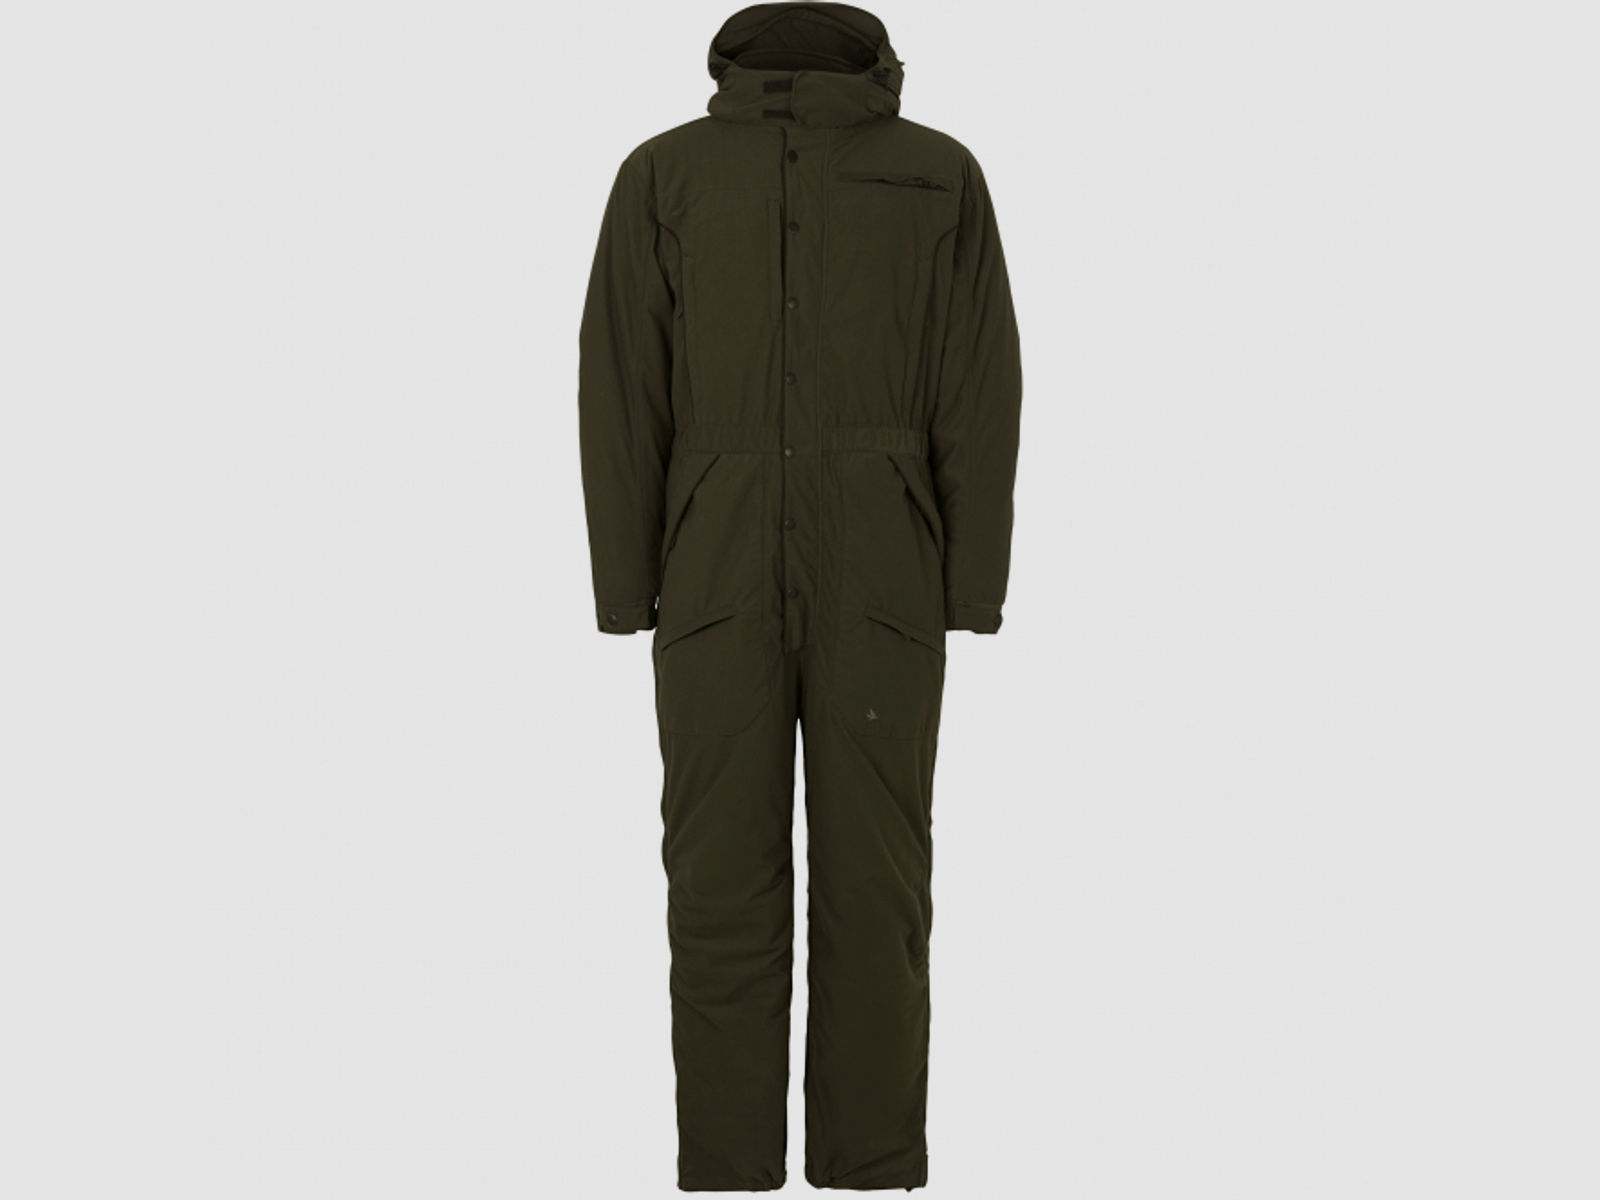 Seeland       Seeland   Herren Overall Outthere (pine green)